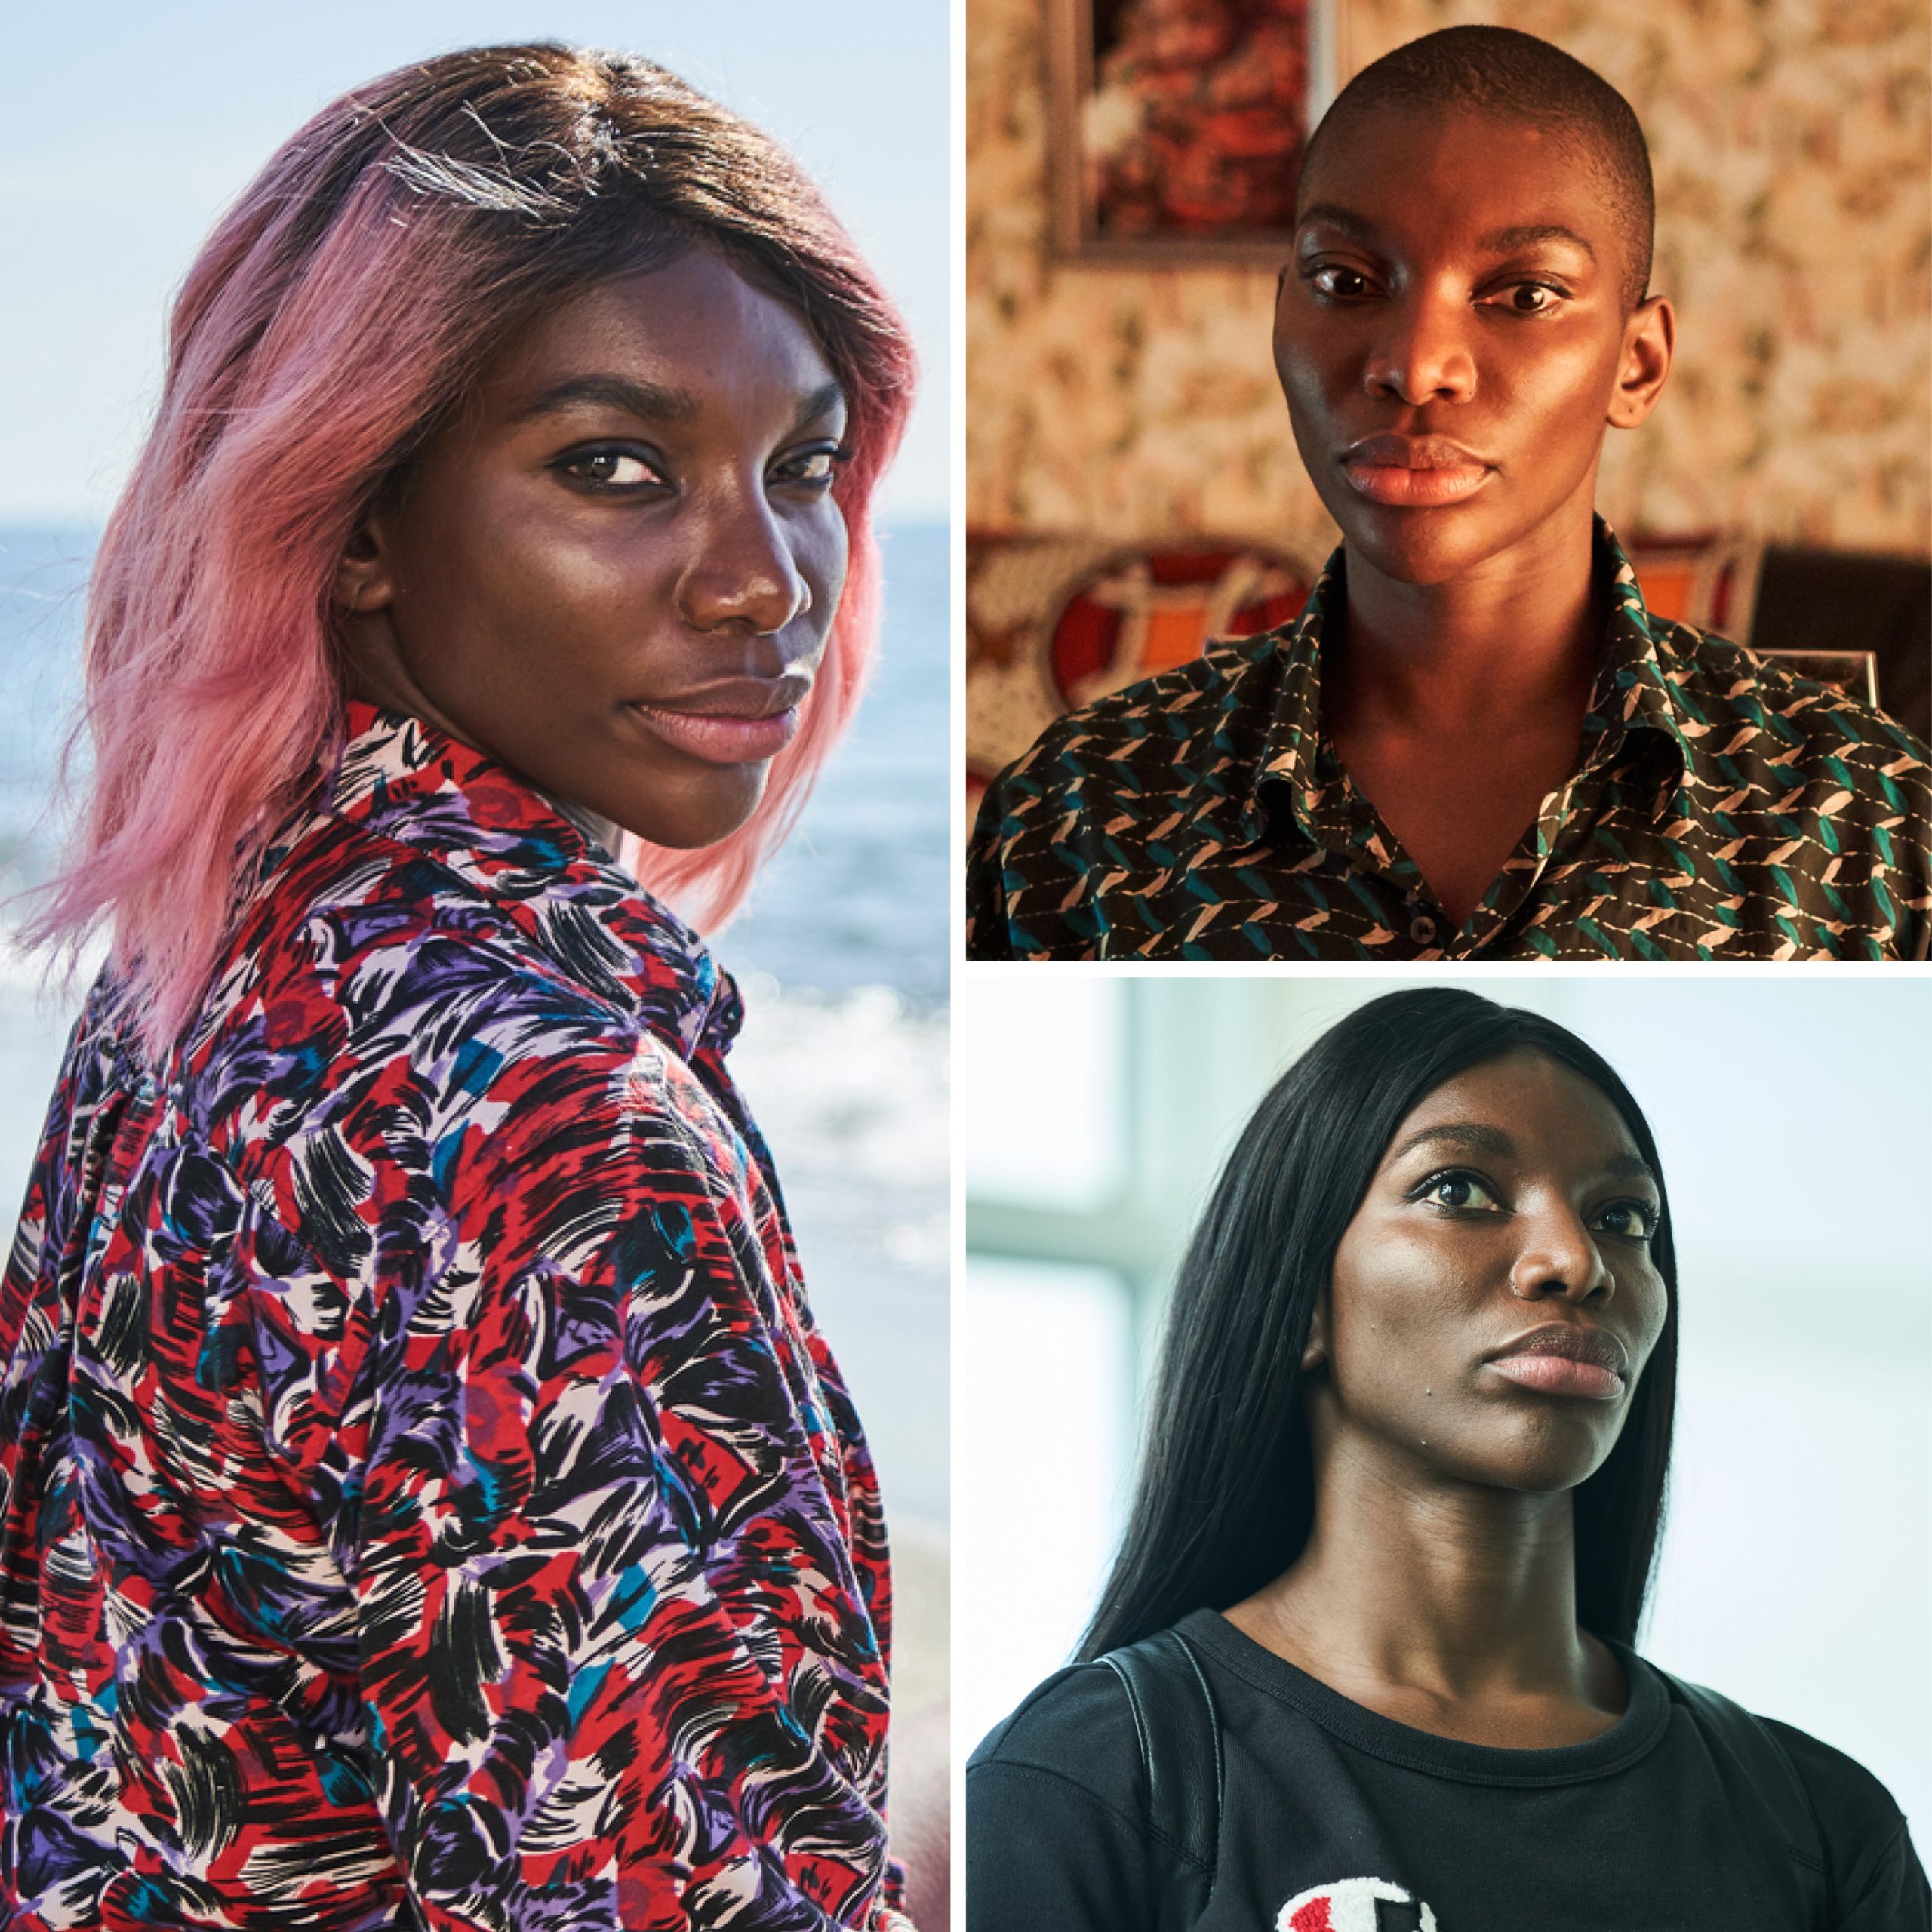 How Michaela Coel’s ‘I May Destroy You’ Creates Character Through Hair